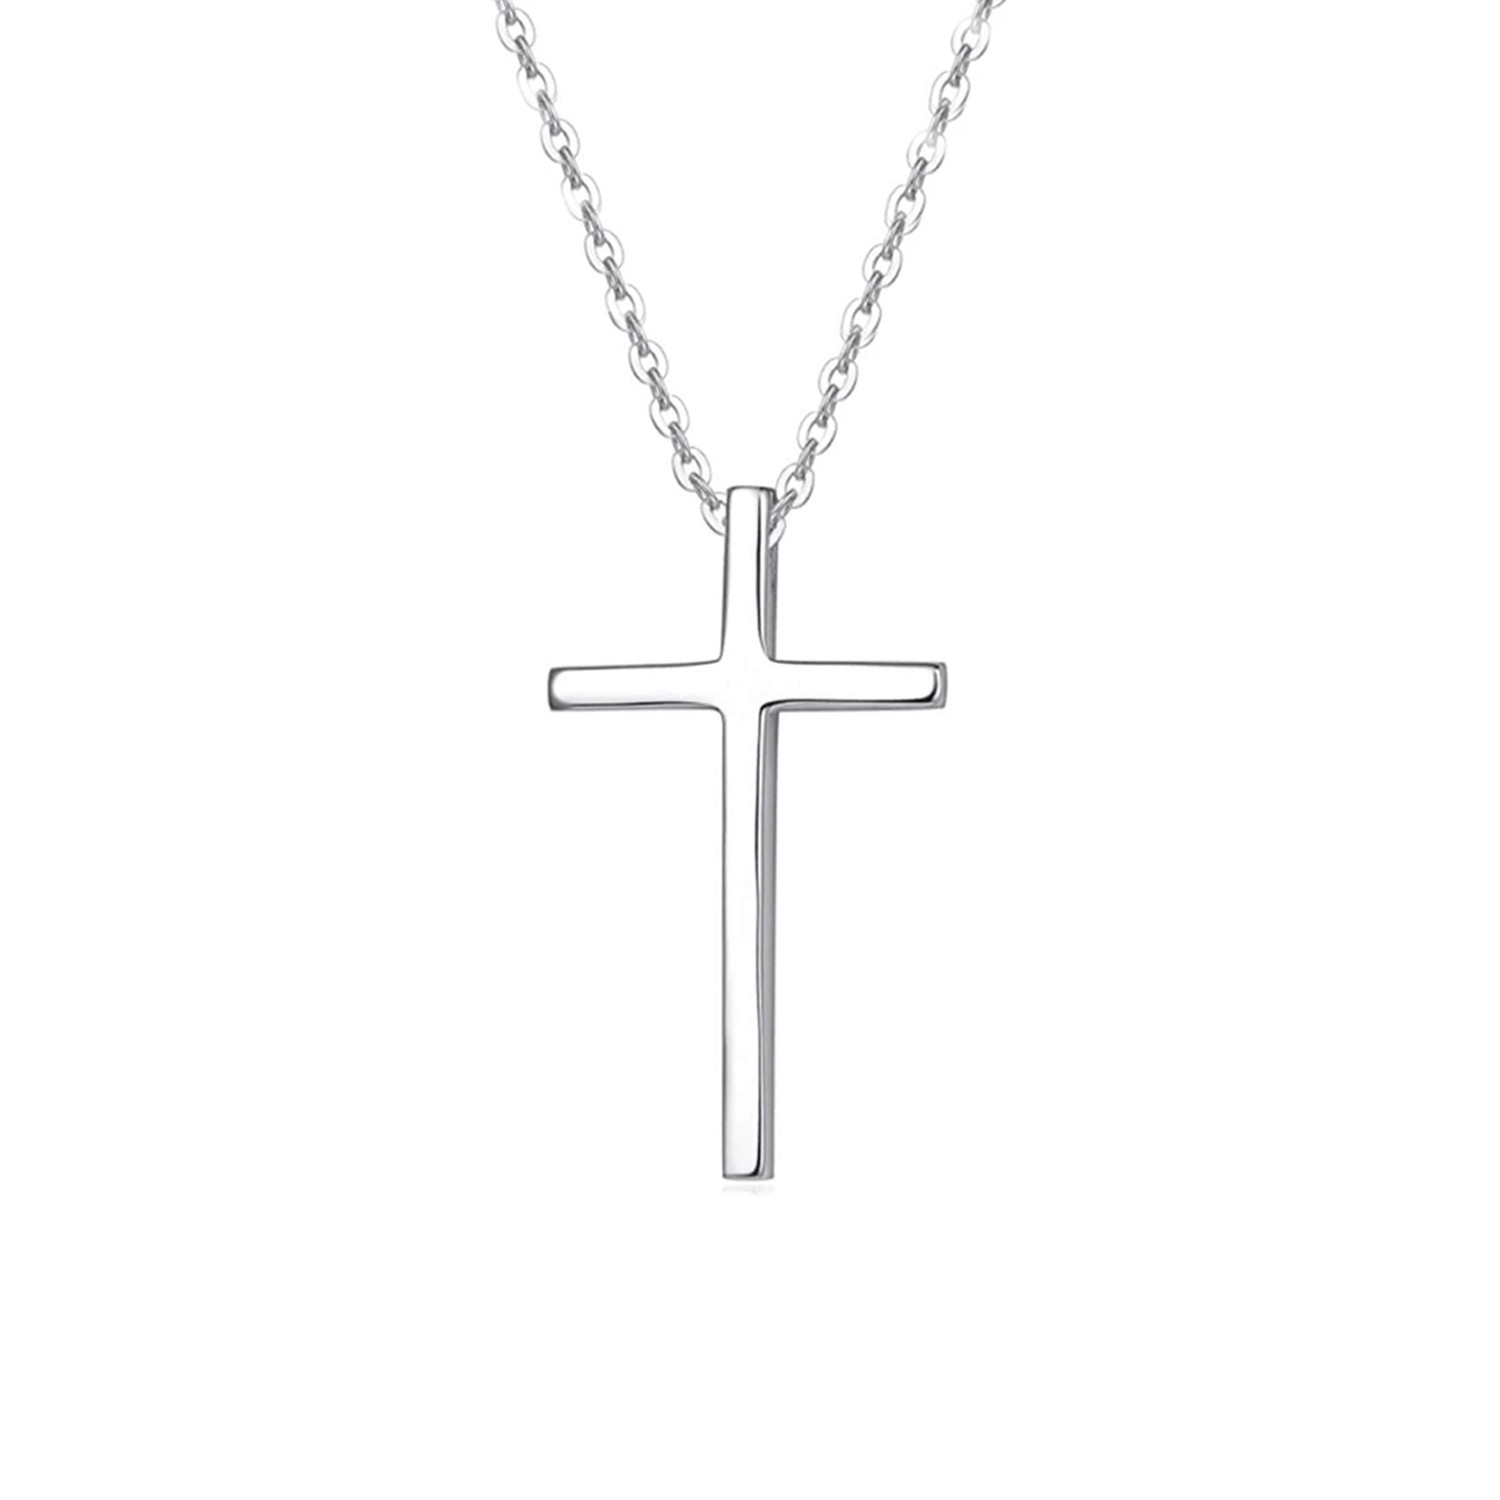 Fanci "Committed Faith" Cross Pendant 14K White Gold Necklace Main